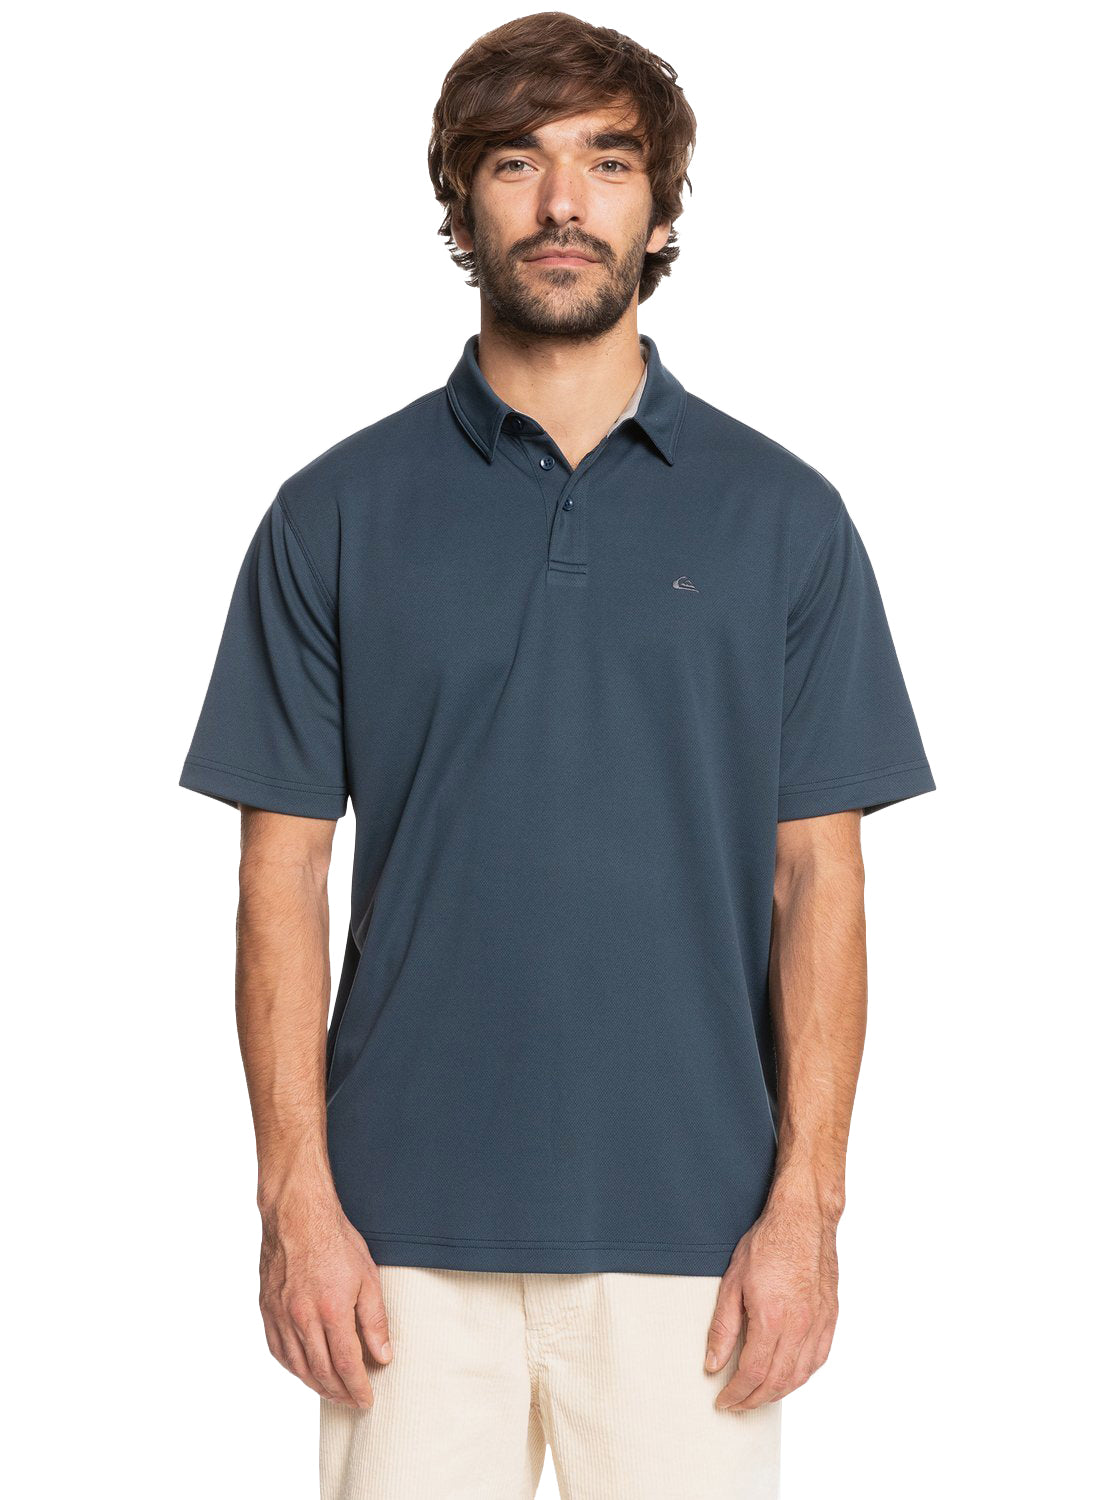 Quiksilver Waterman Water 2 Polo BSL0 M